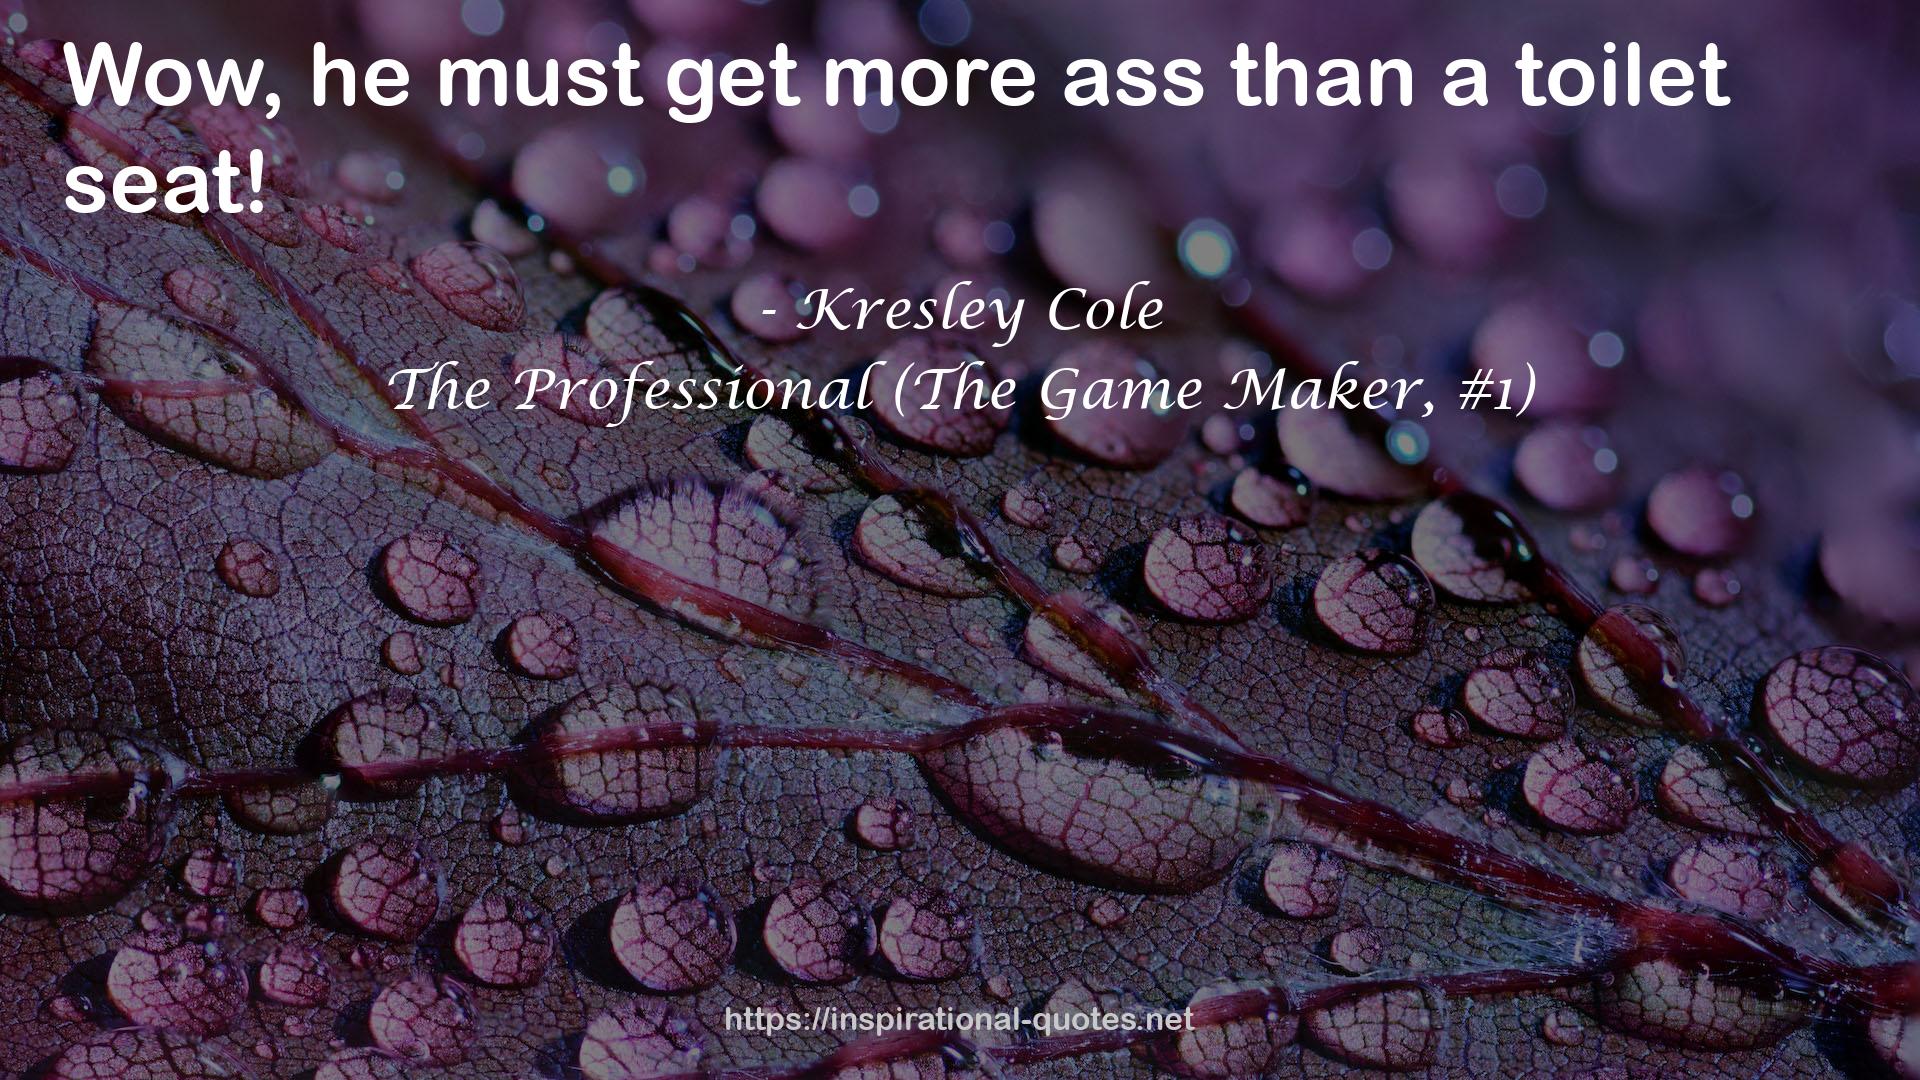 The Professional (The Game Maker, #1) QUOTES